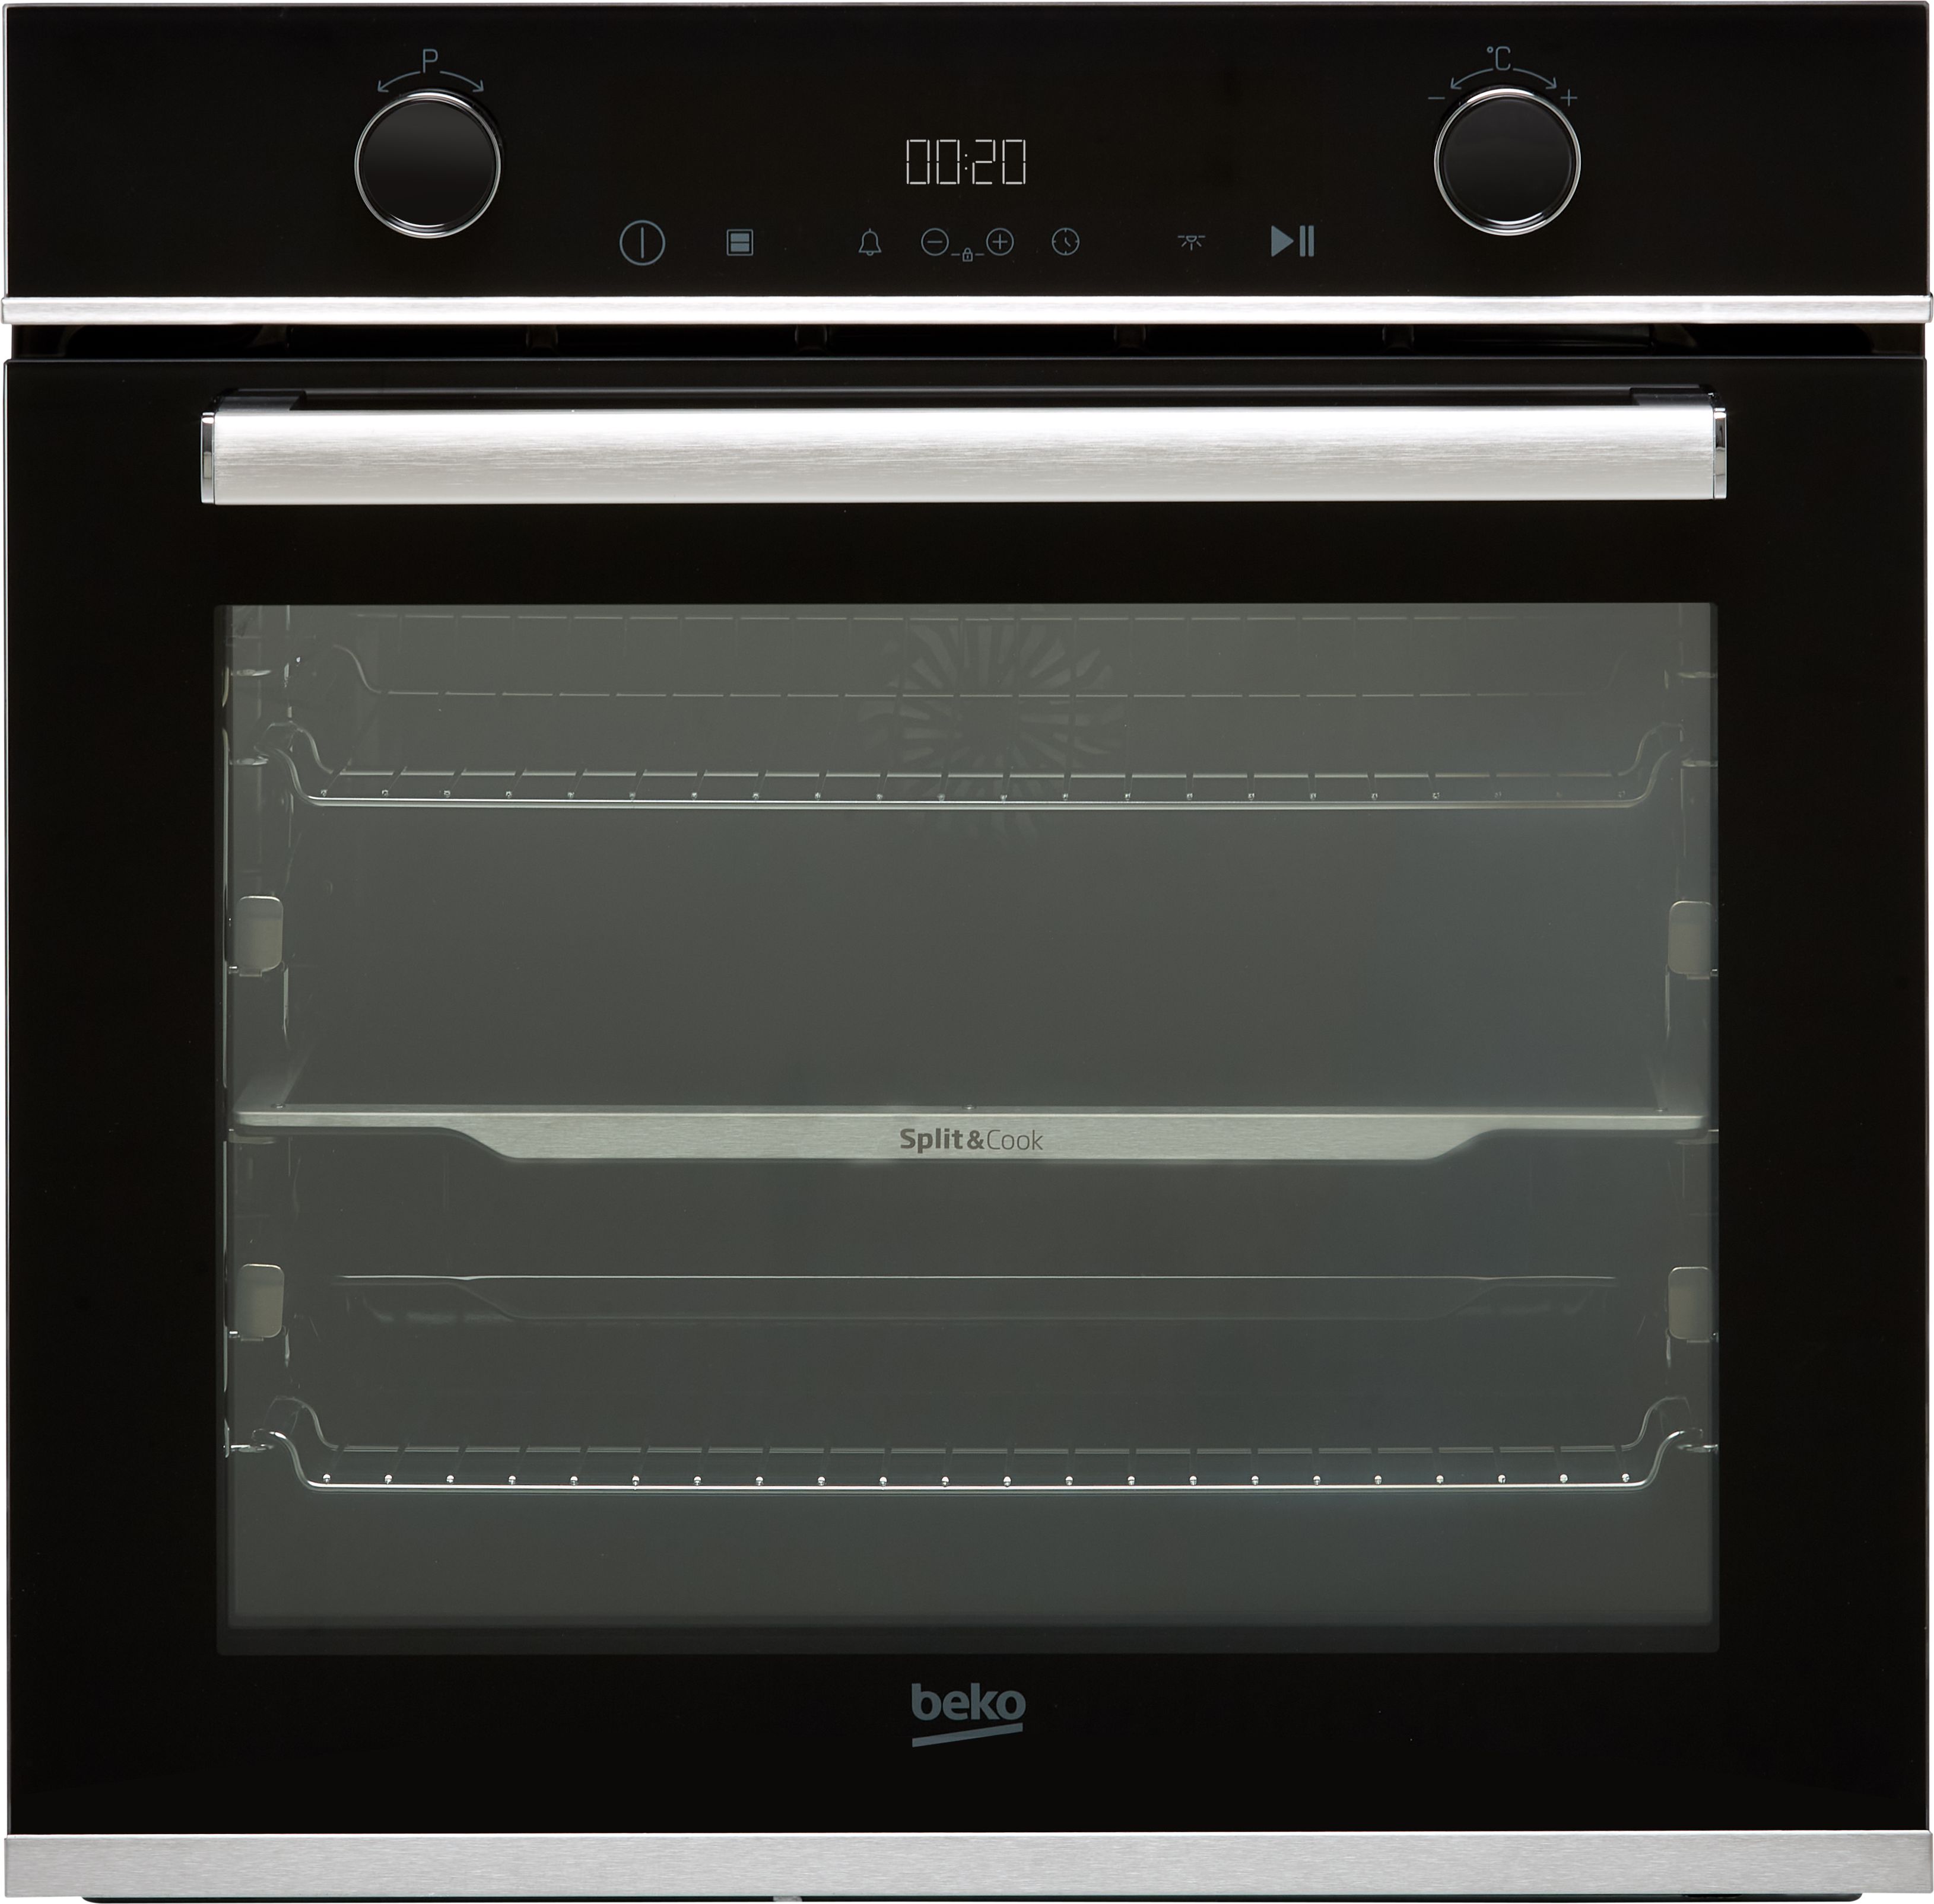 Beko AeroPerfect RecycledNet BBVM13400XC Built In Electric Single Oven - Stainless Steel - A+ Rated, Stainless Steel